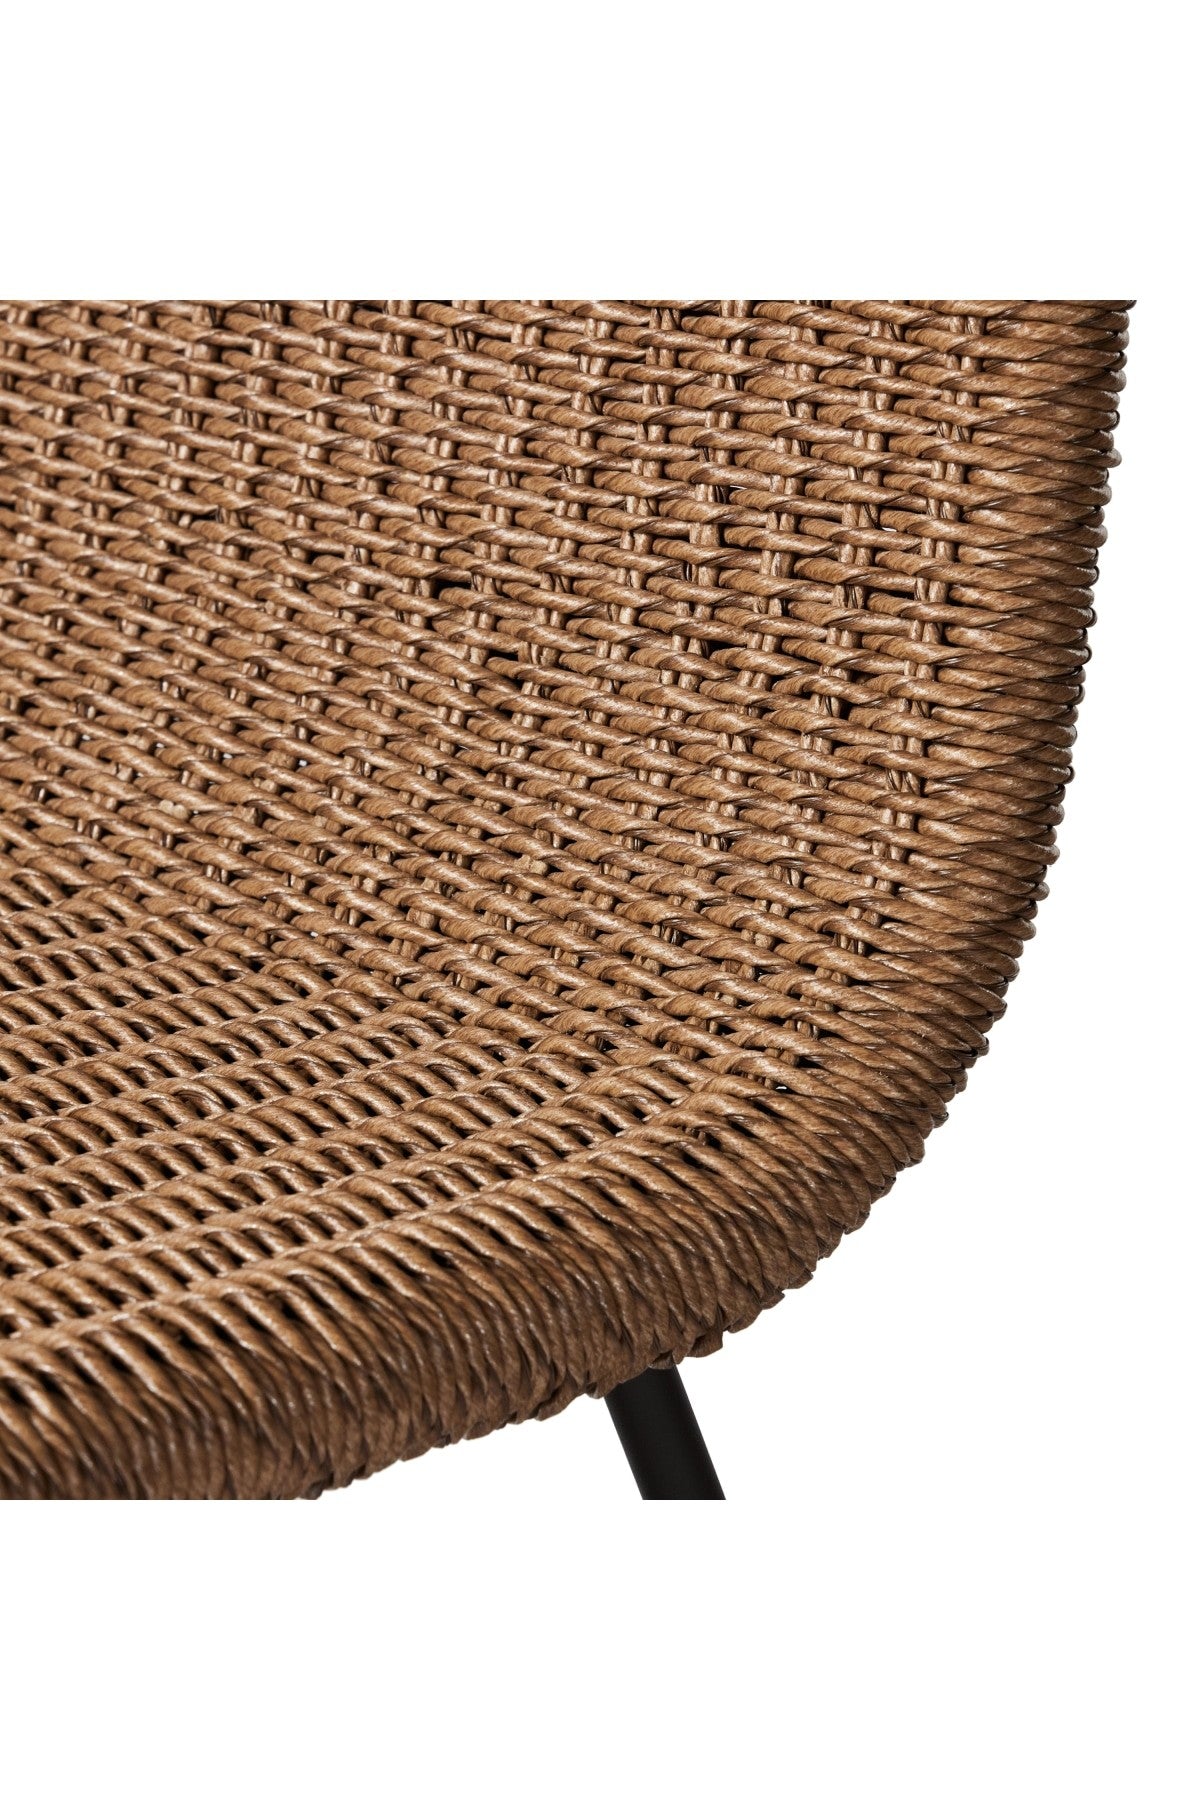 Fargo Outdoor Dining Chair - 2 Colors